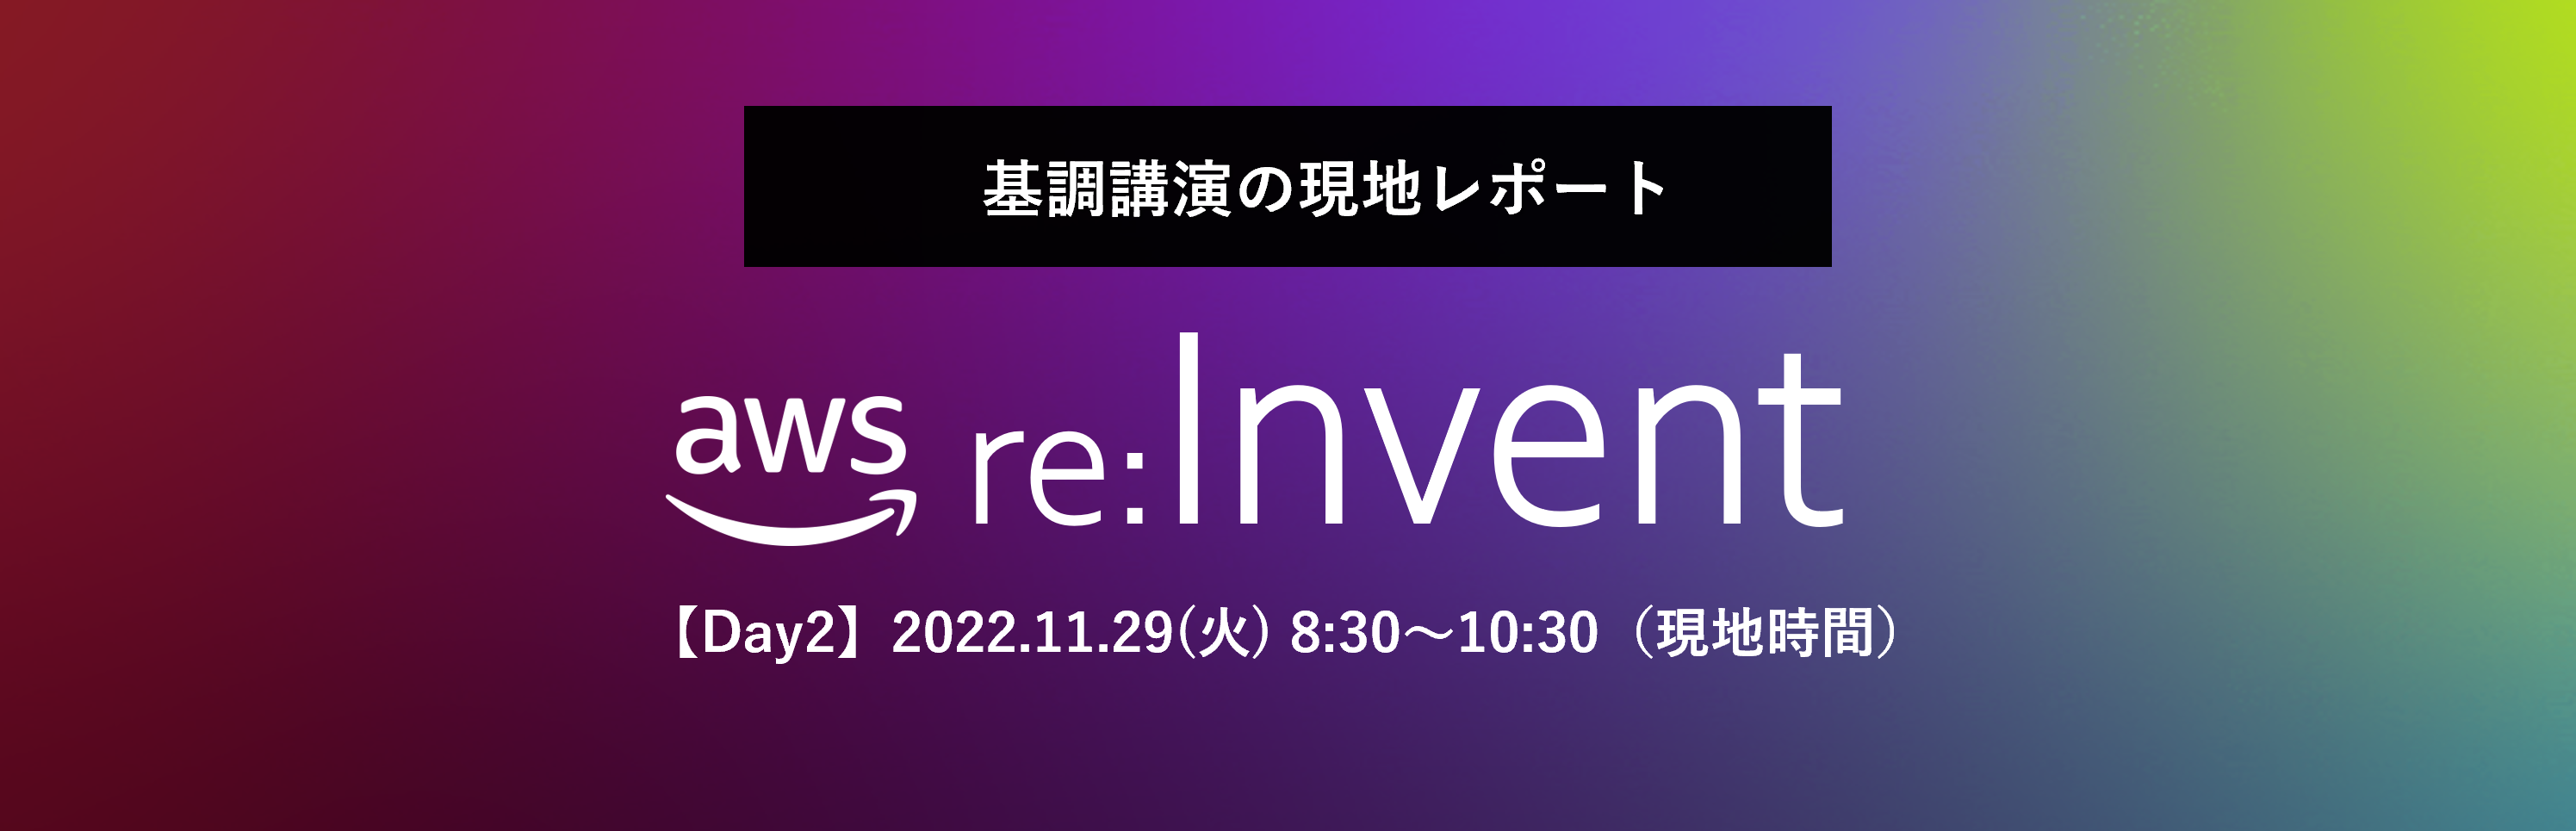 AWS re:Invent2022のKeynote Day2